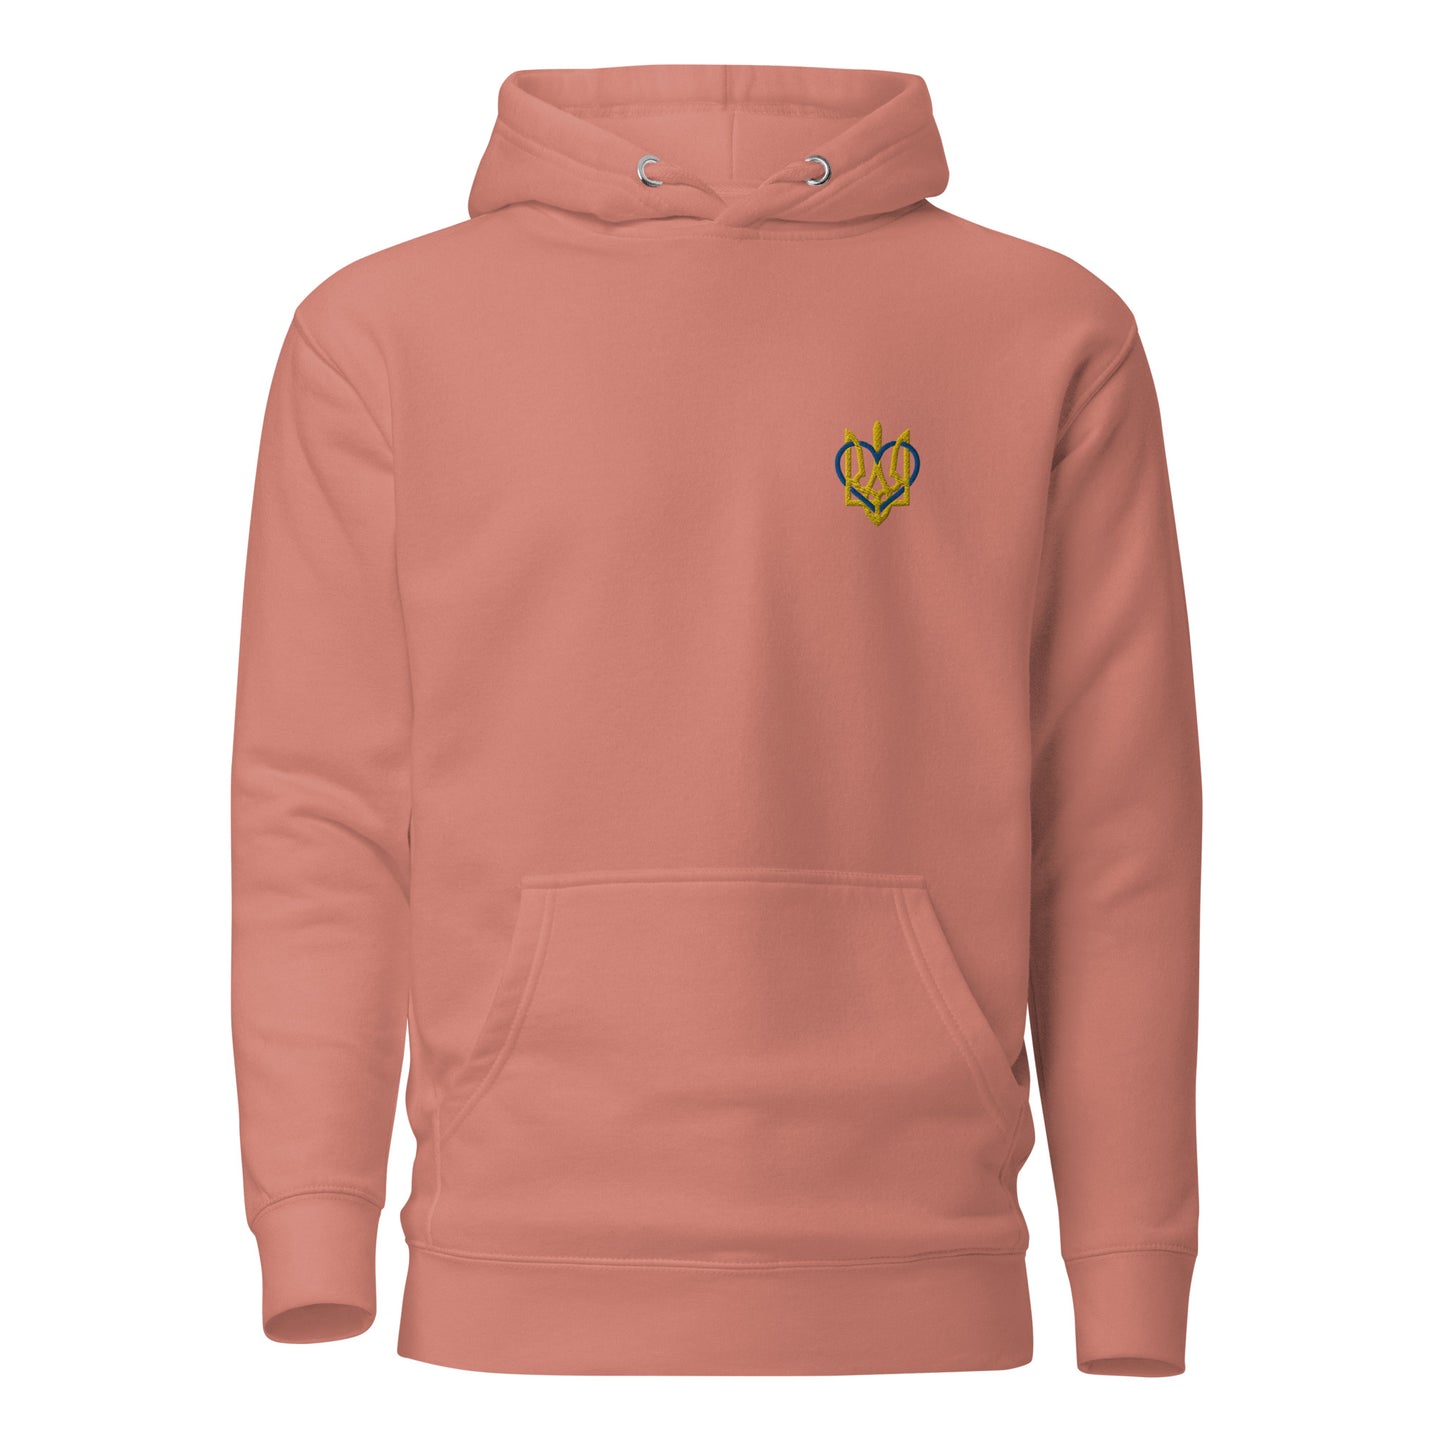 Hoodie with Embroidery Heart on left